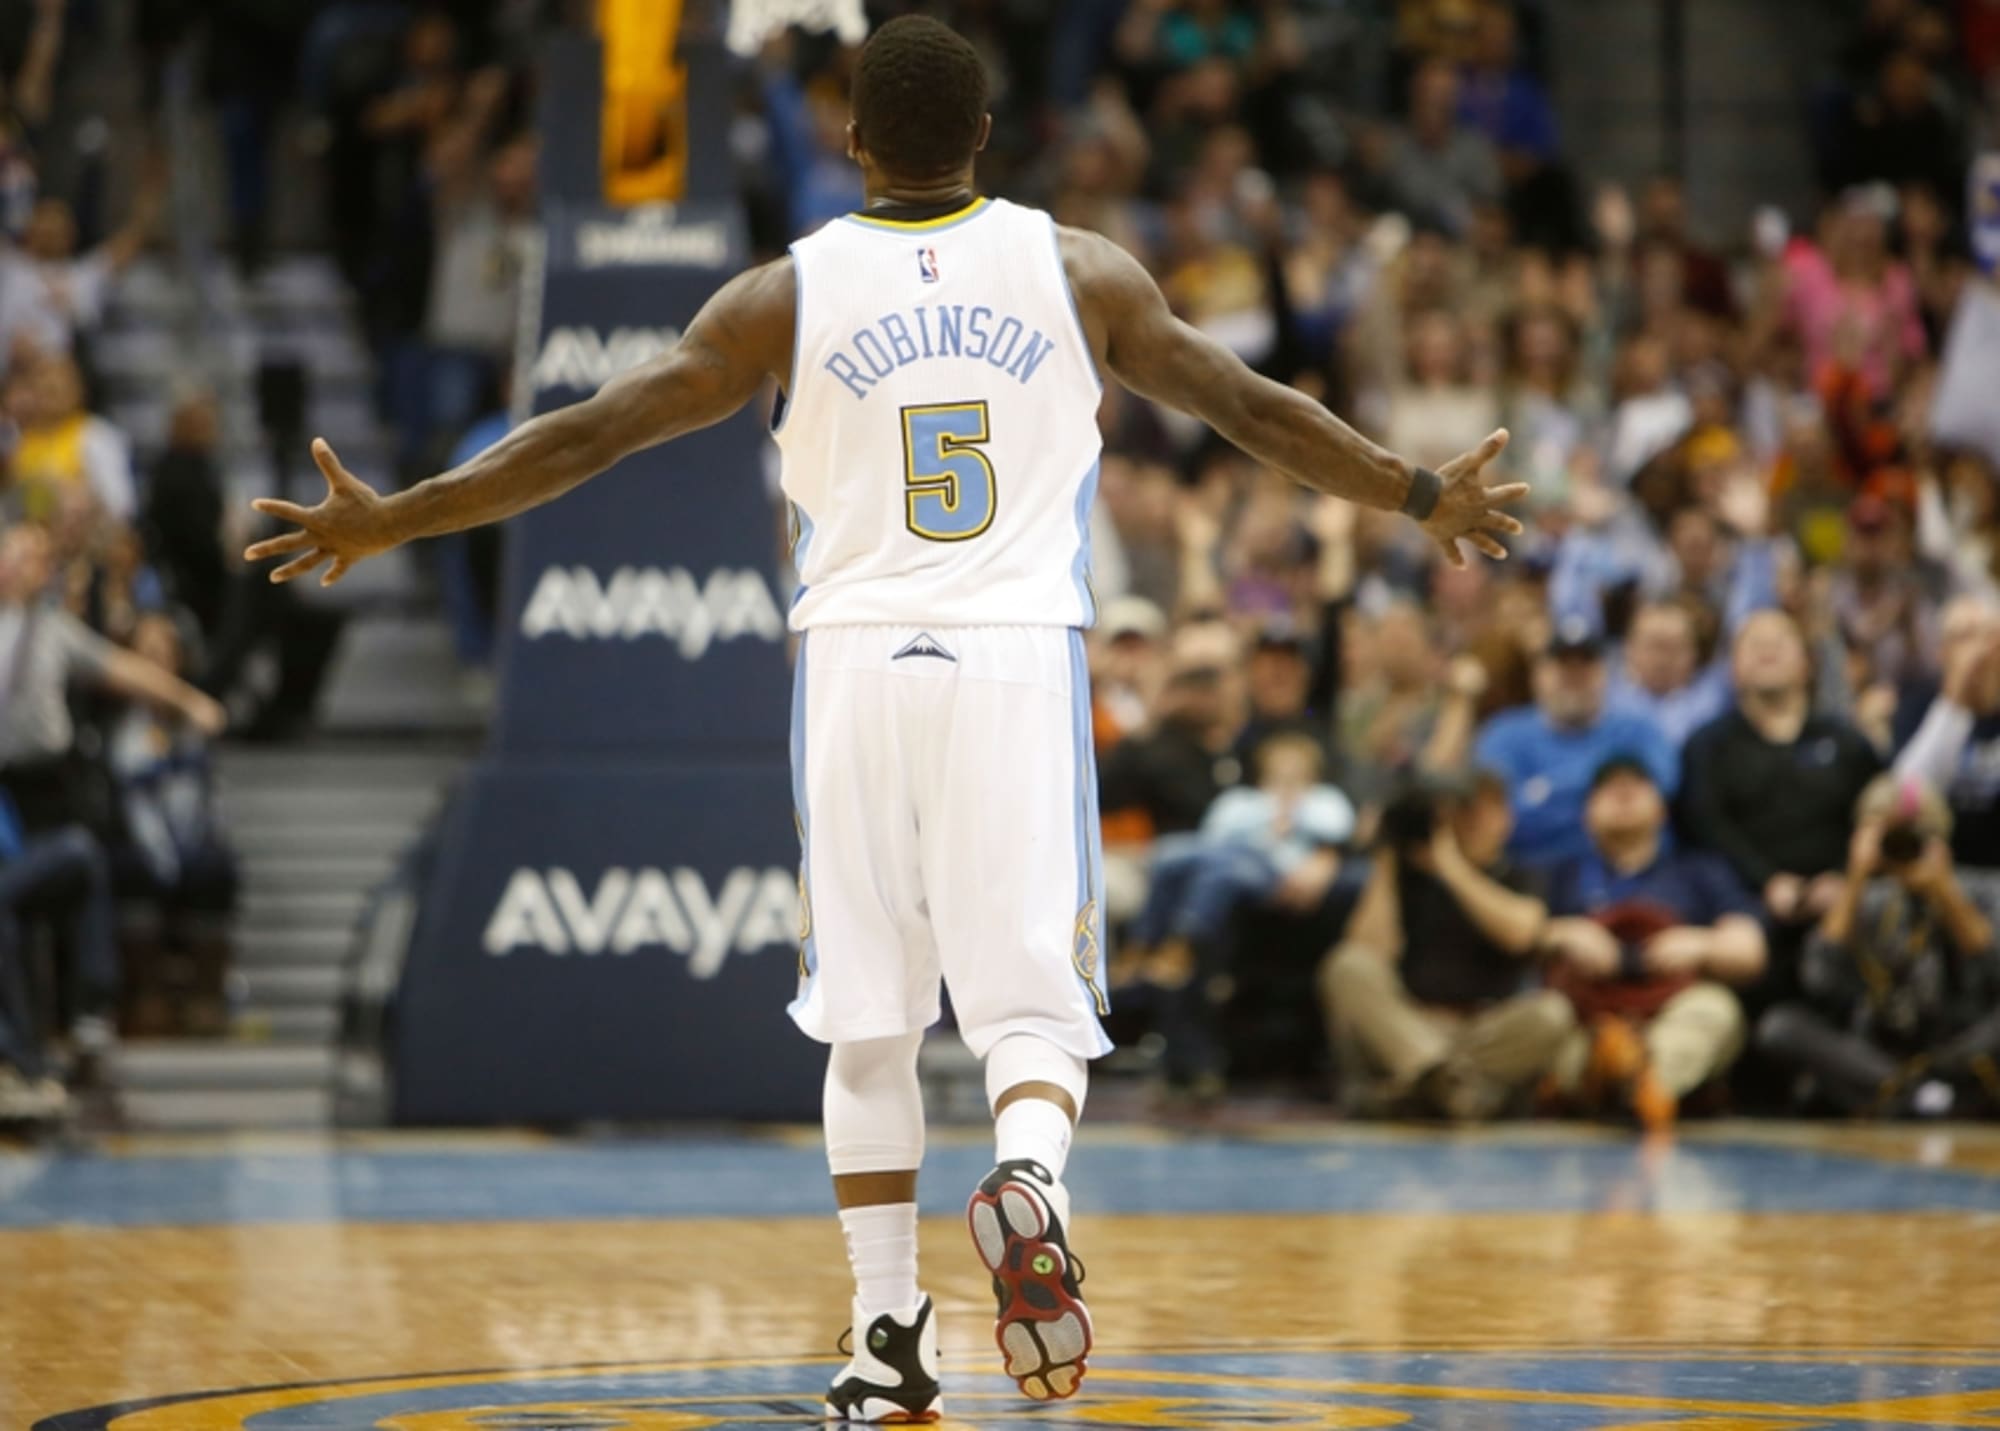 Nate Robinson agrees to 2-year deal with Denver Nuggets